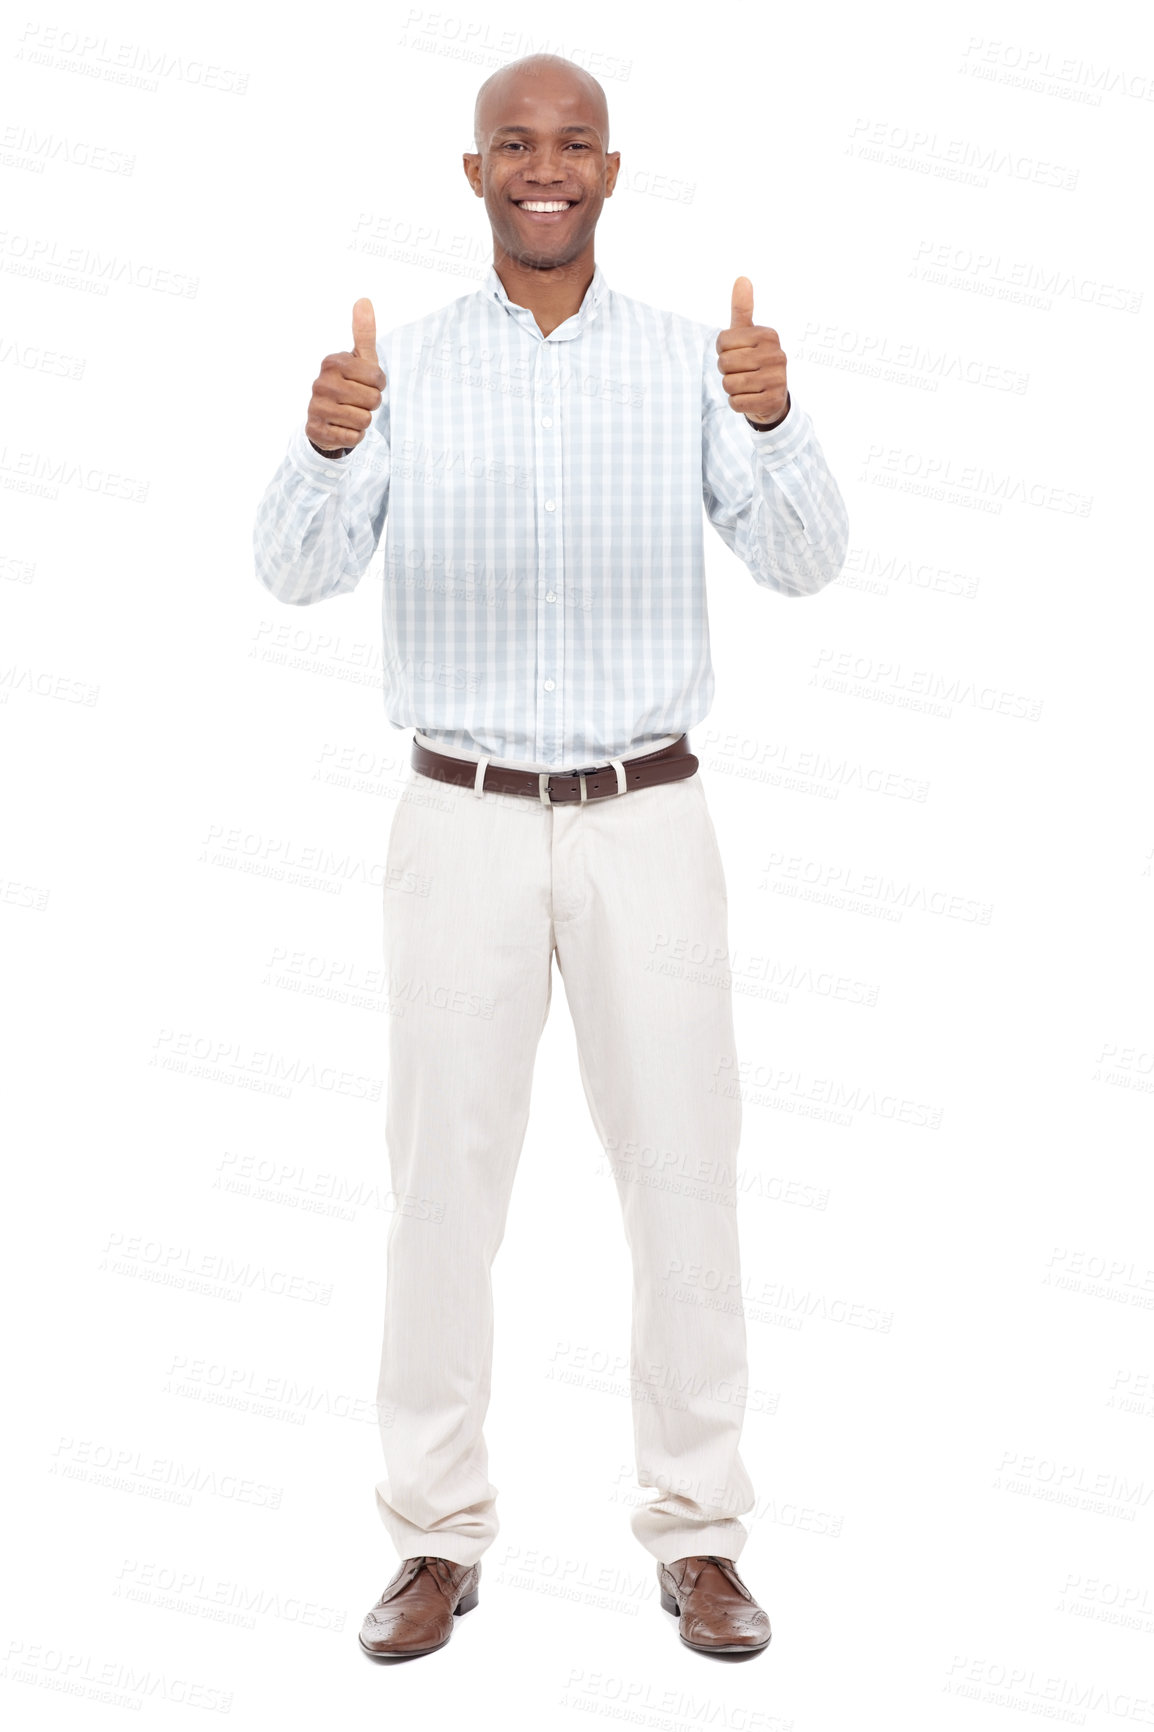 Buy stock photo Full length studio portrait of an excited young man giving two thumbs up to the camera